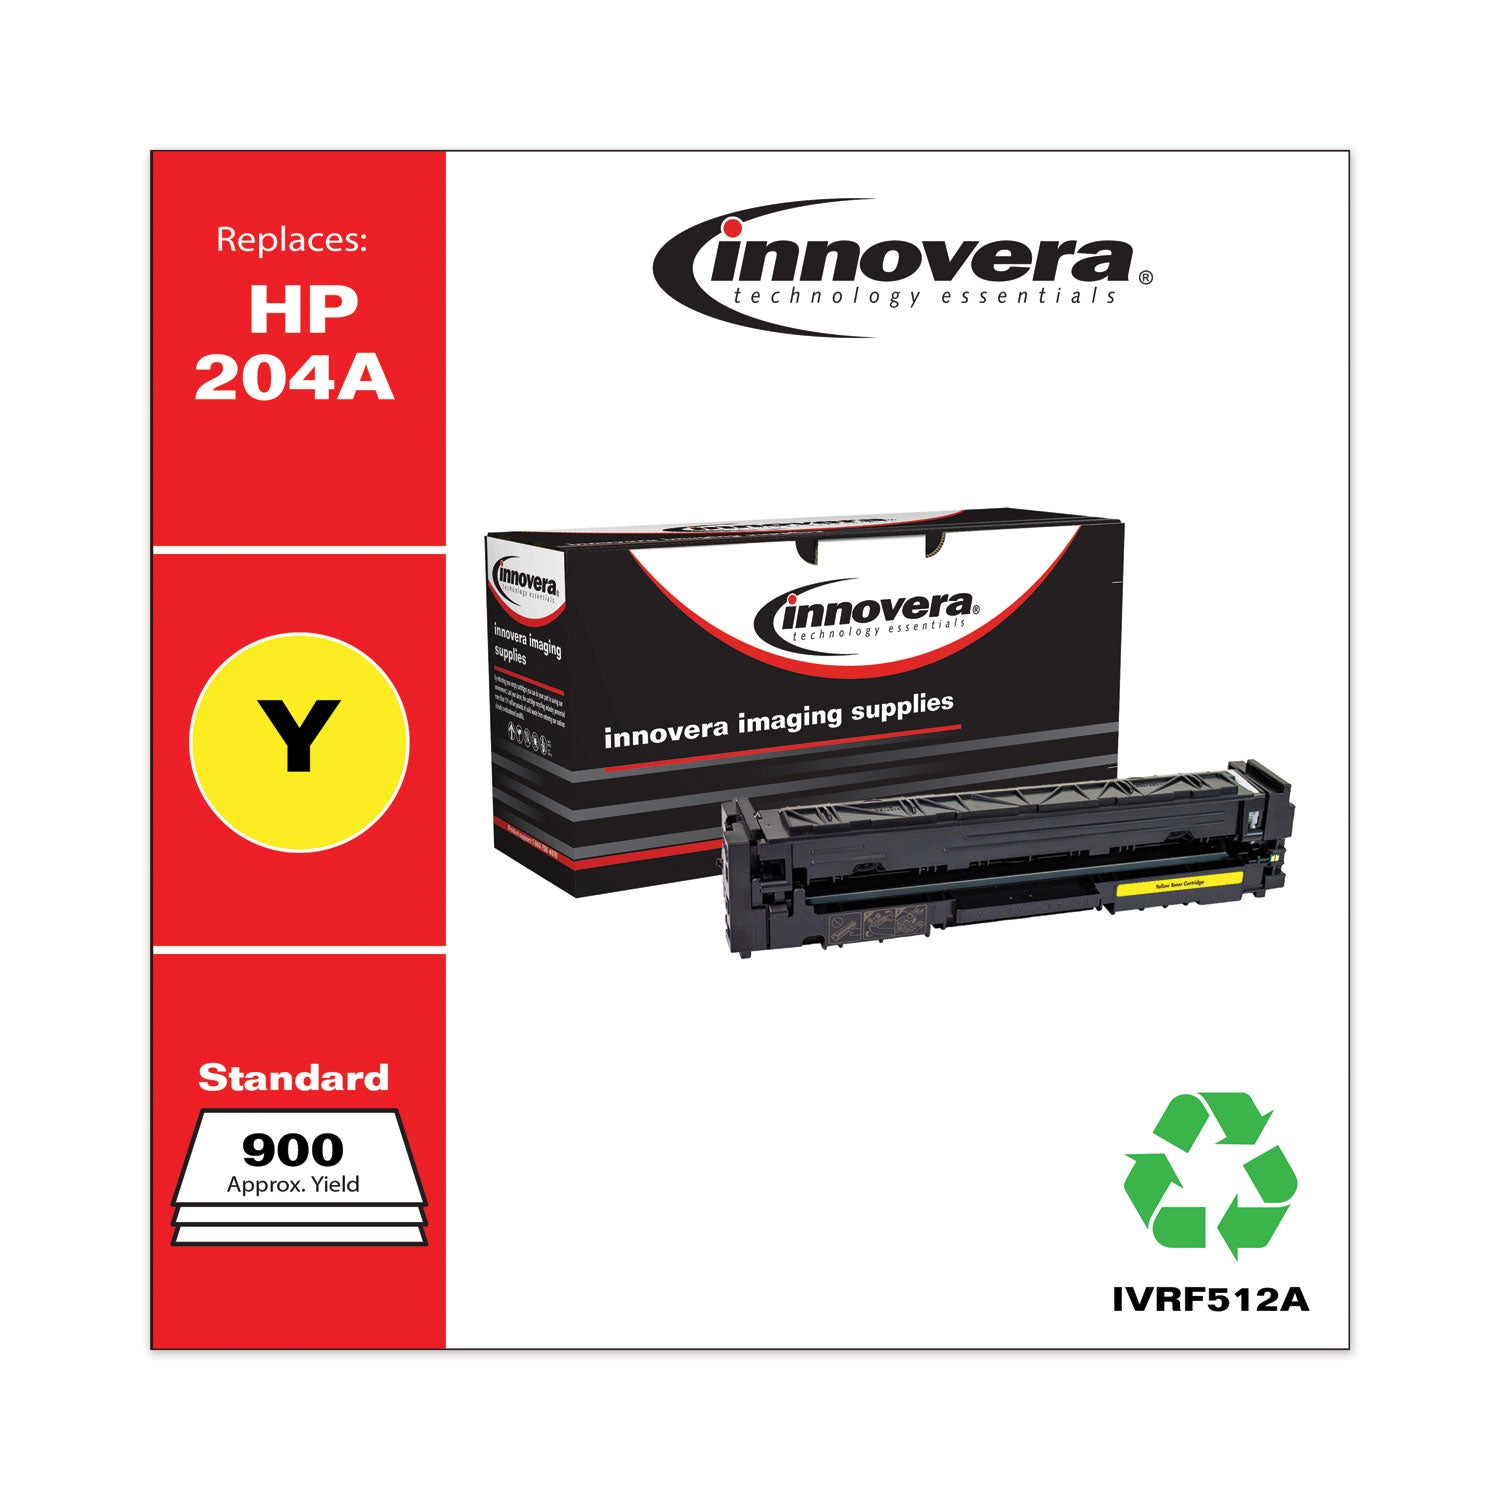 remanufactured-yellow-toner-replacement-for-204a-cf512a-900-page-yield_ivrf512a - 2